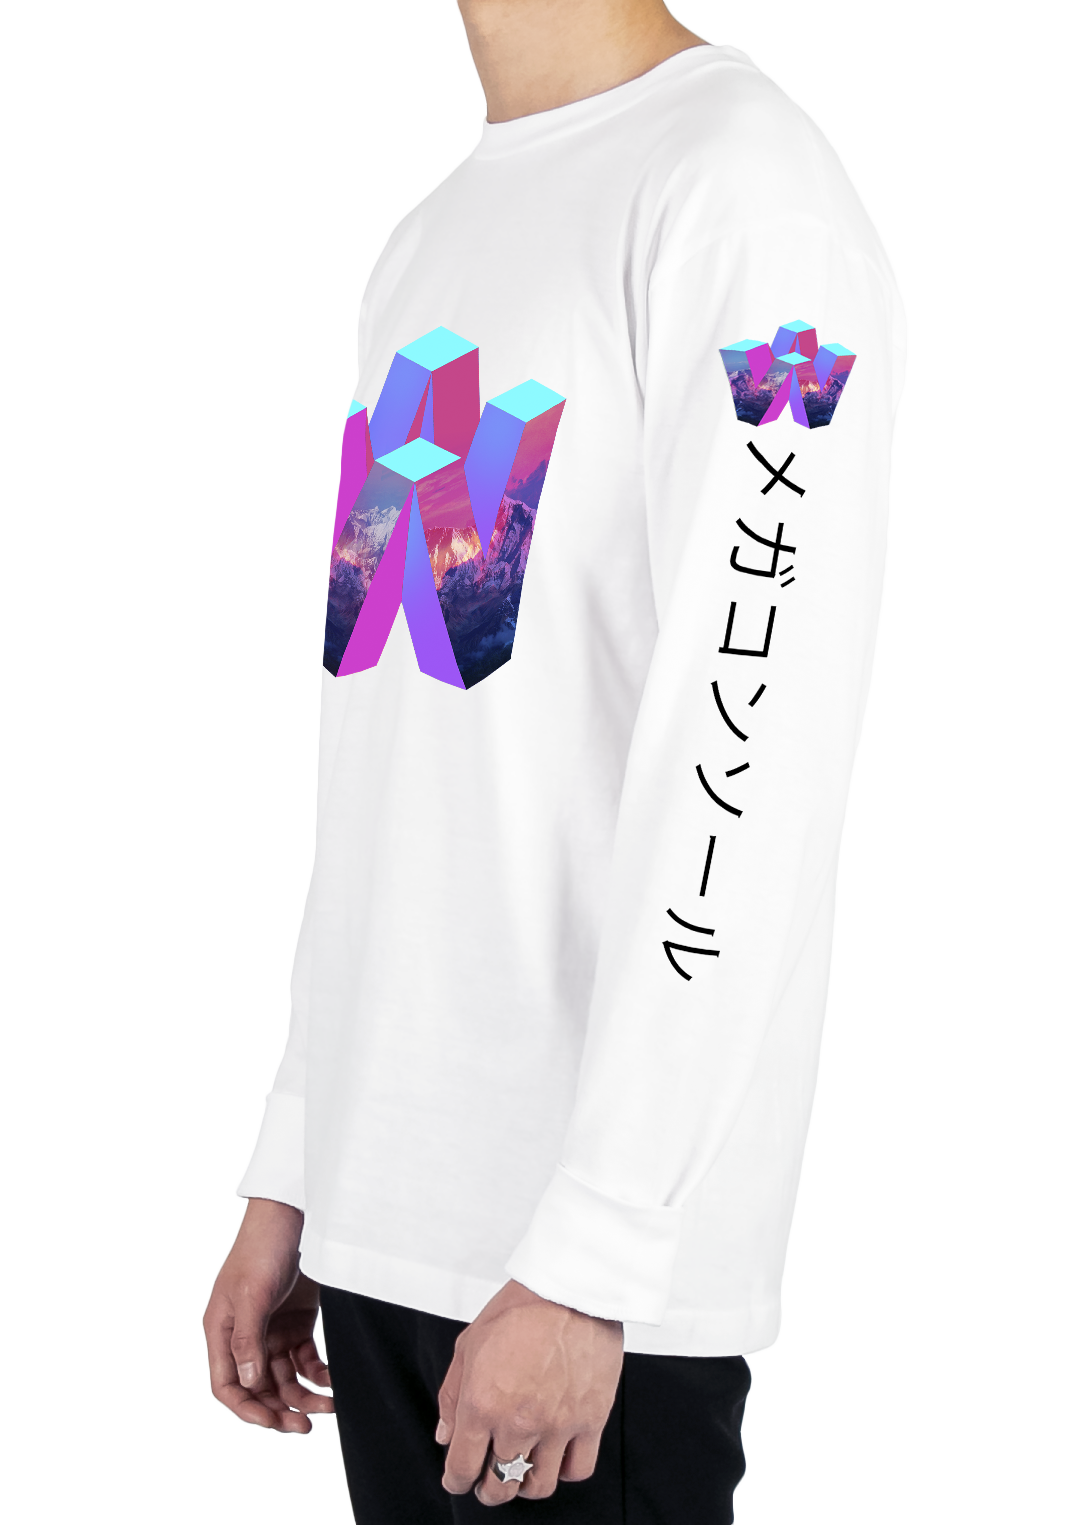 Billy boykot Settle Experience Aesthetic and Vaporwave fashion with Vapor95's Long Sleeve  Graphic Tees | V64 Long Sleeve Tee